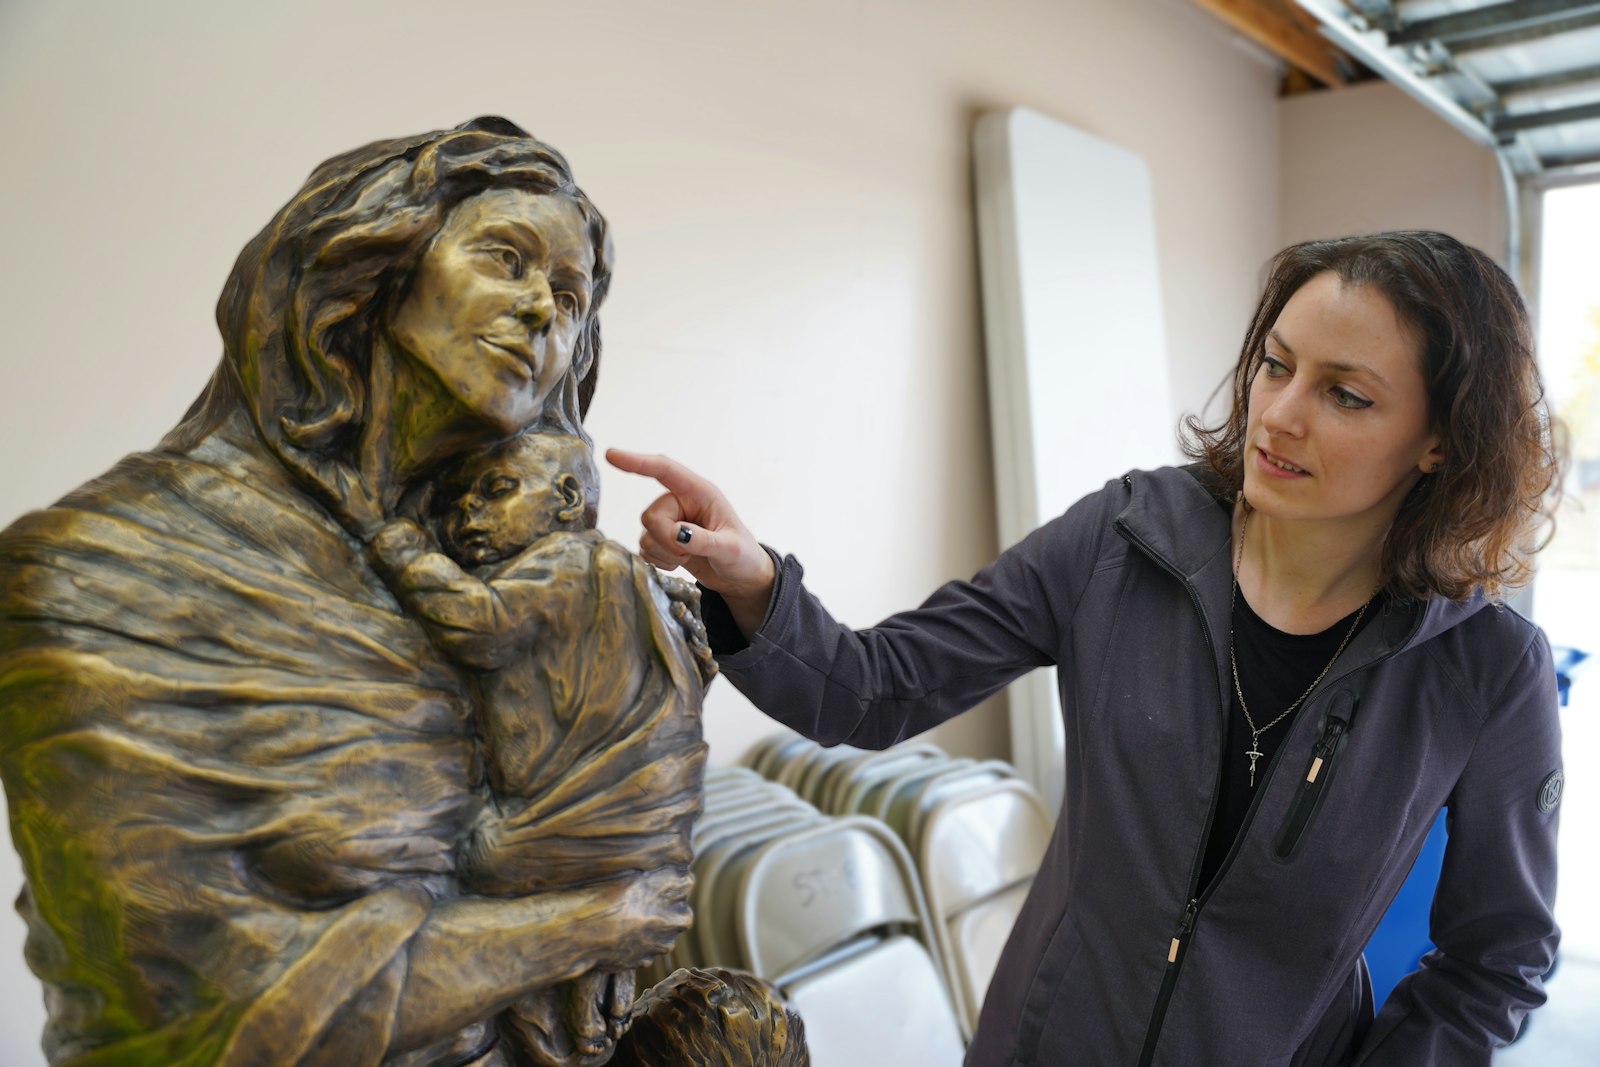 Artist Mary Dudek points out a detail on the statue of the Blessed Mother, depicted cradling an infant in her arms. (Daniel Meloy | Detroit Catholic)